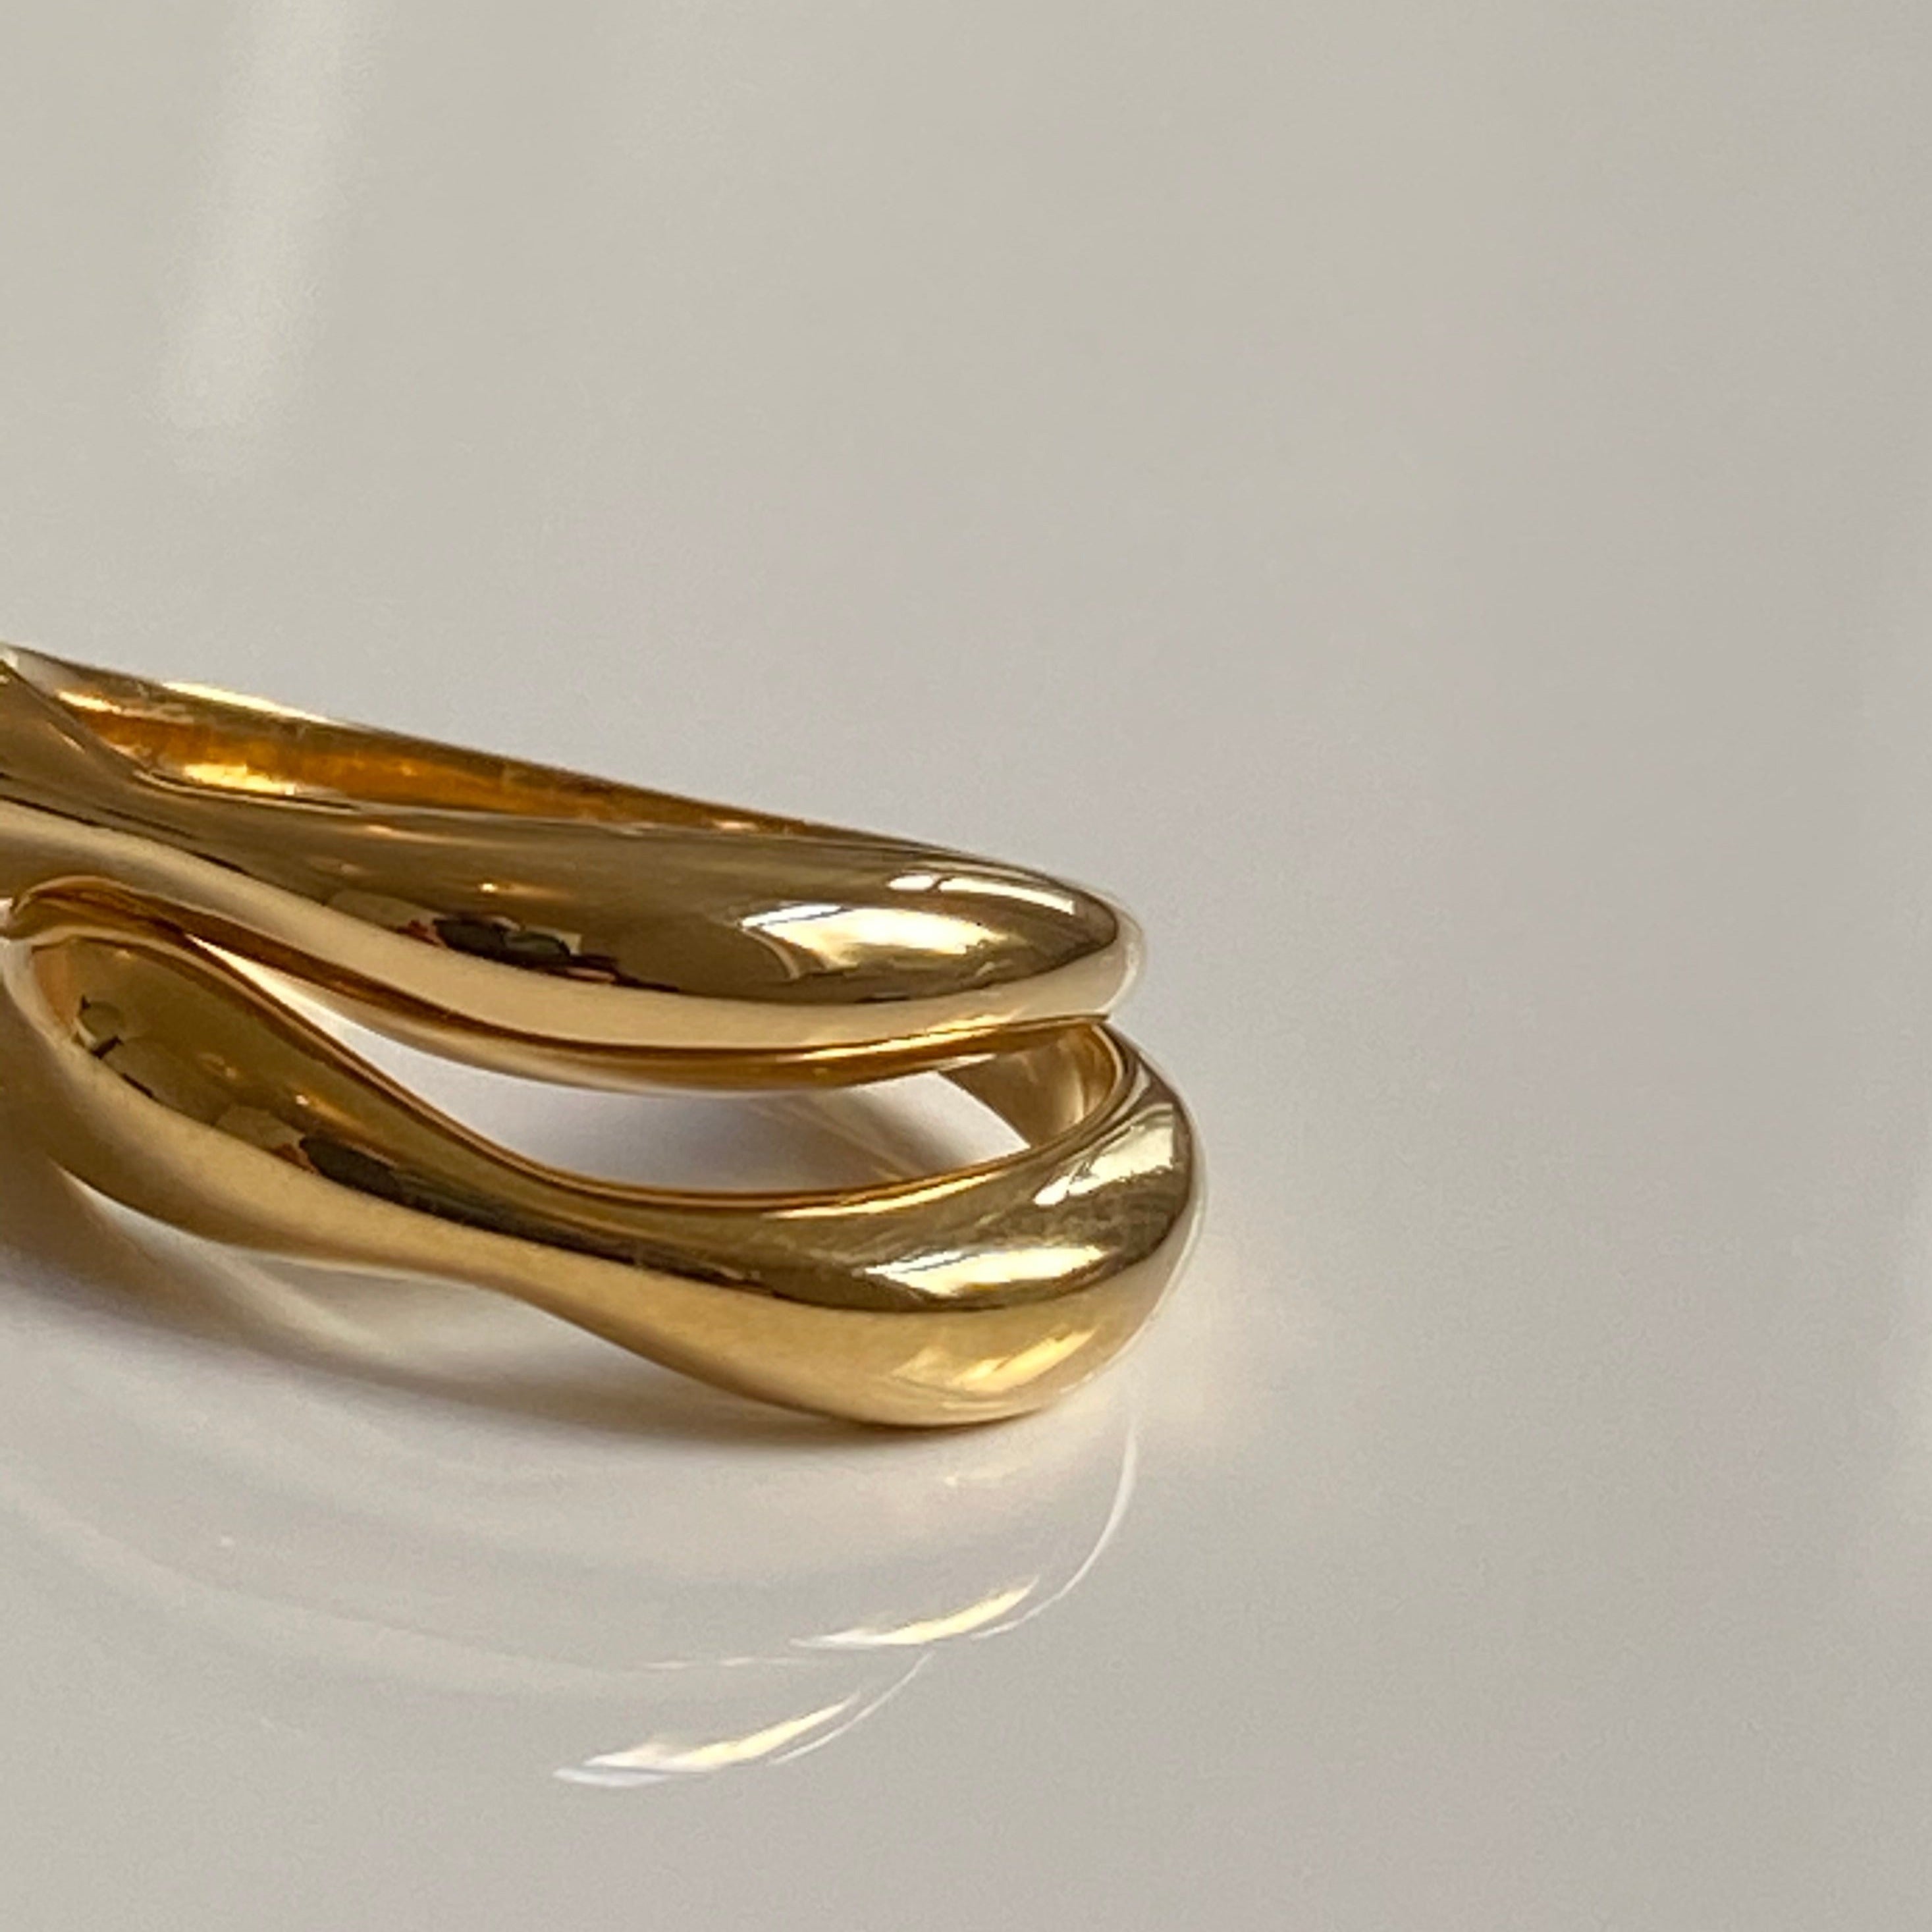 Rings The Double Trouble Set Solid 14k Gold 4